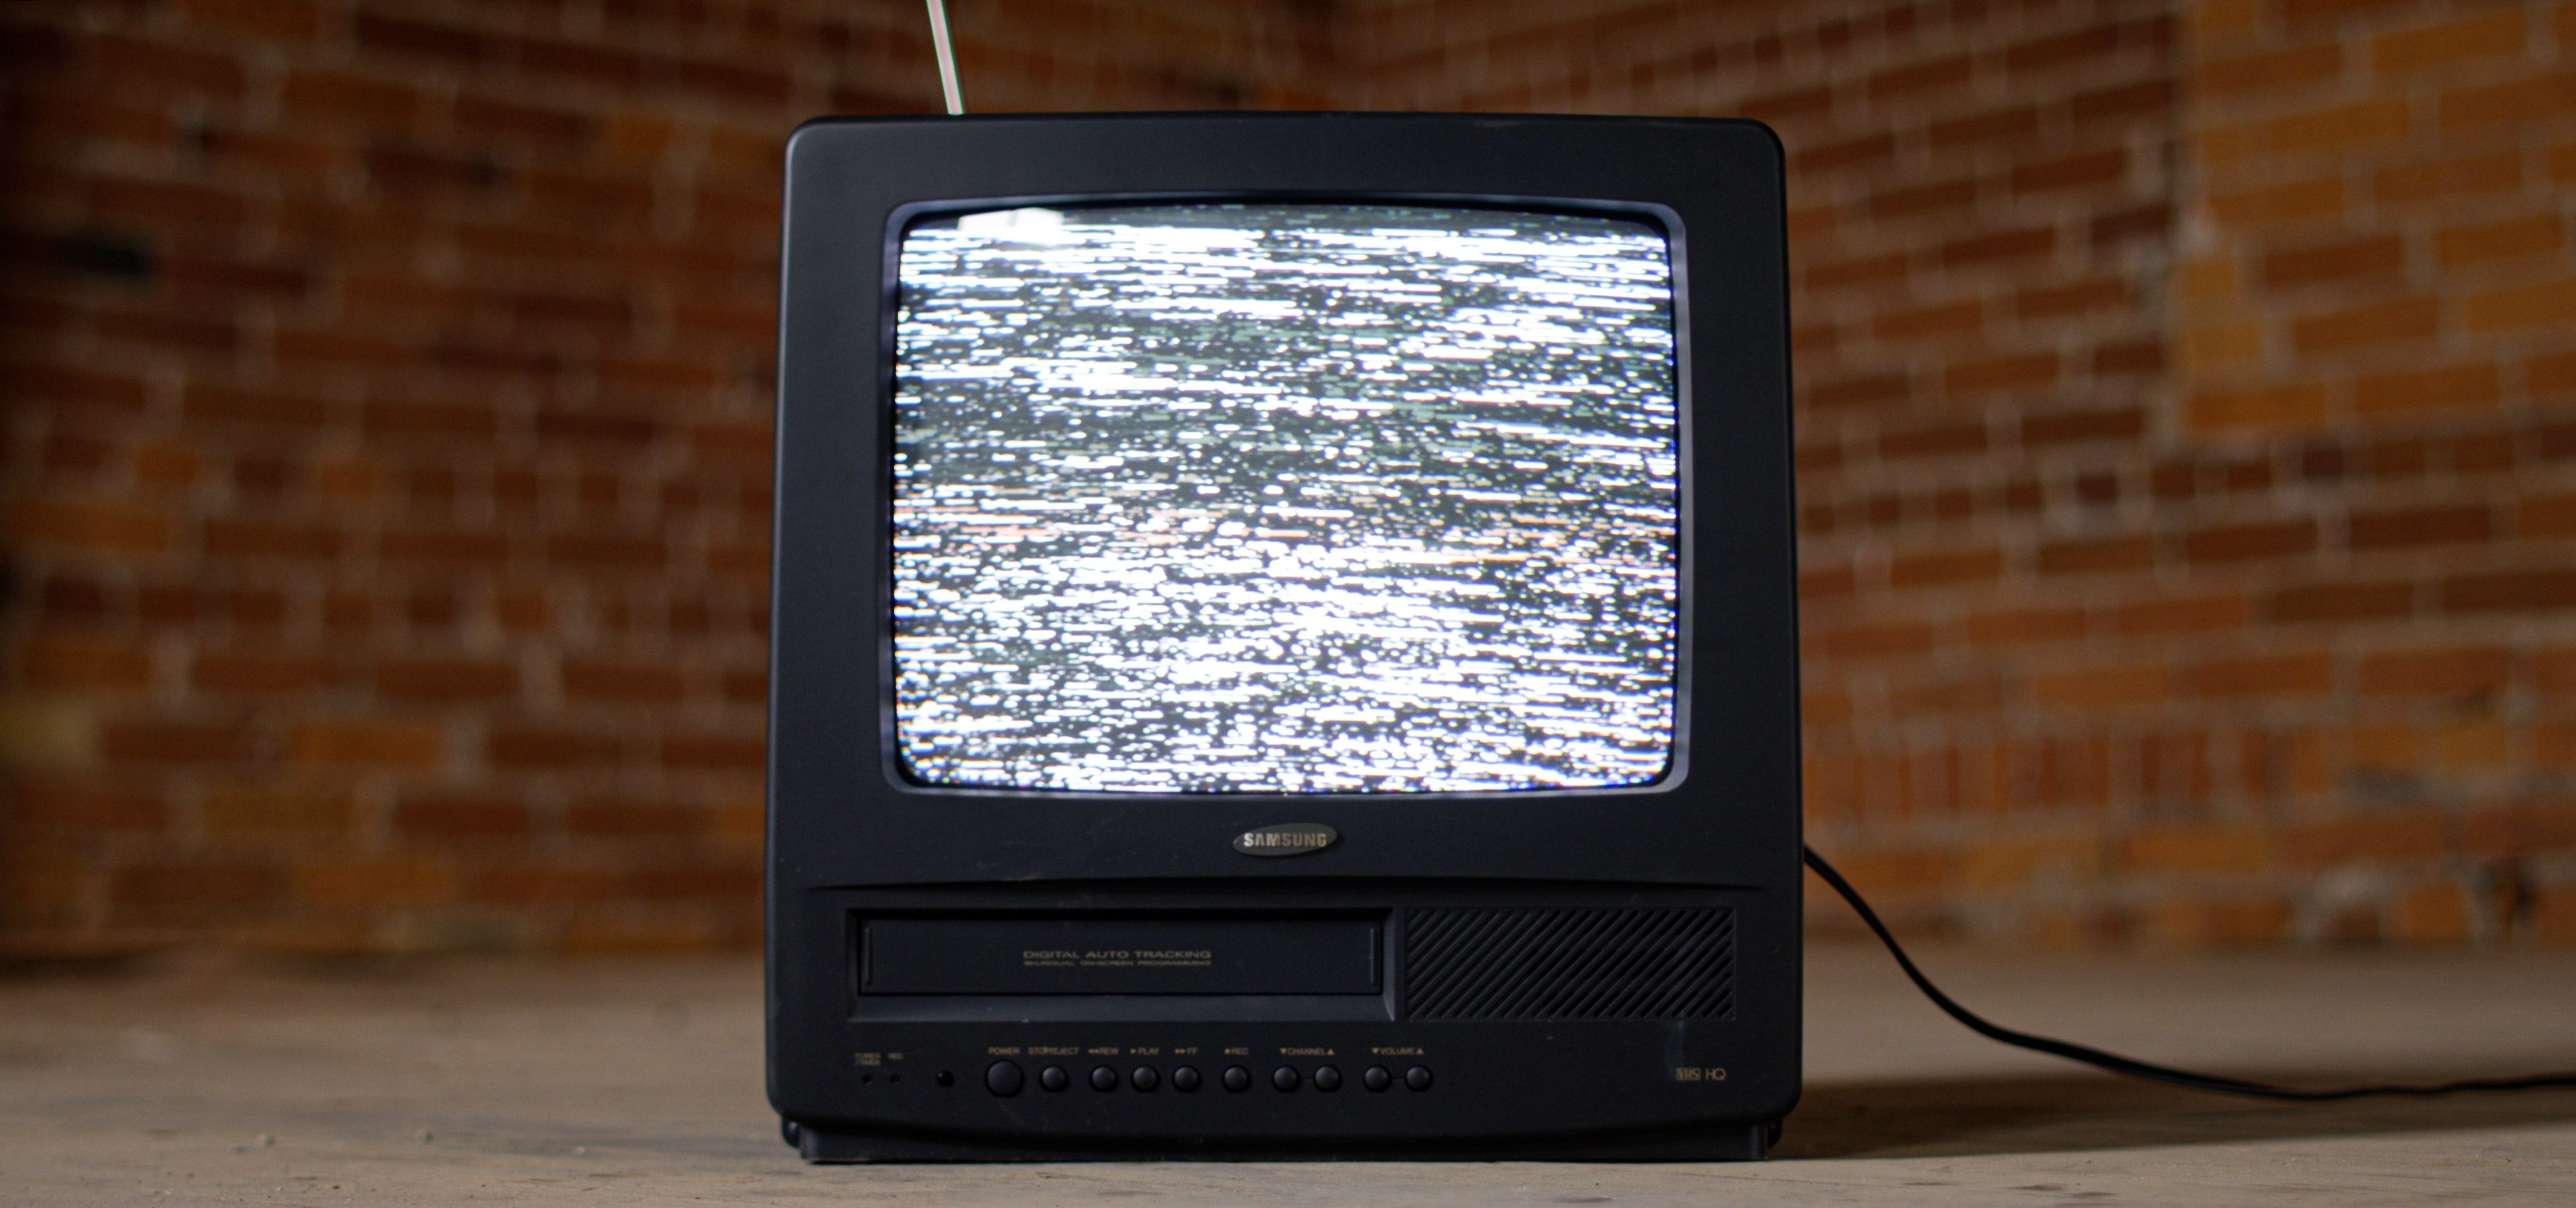 A television with static on the screen.